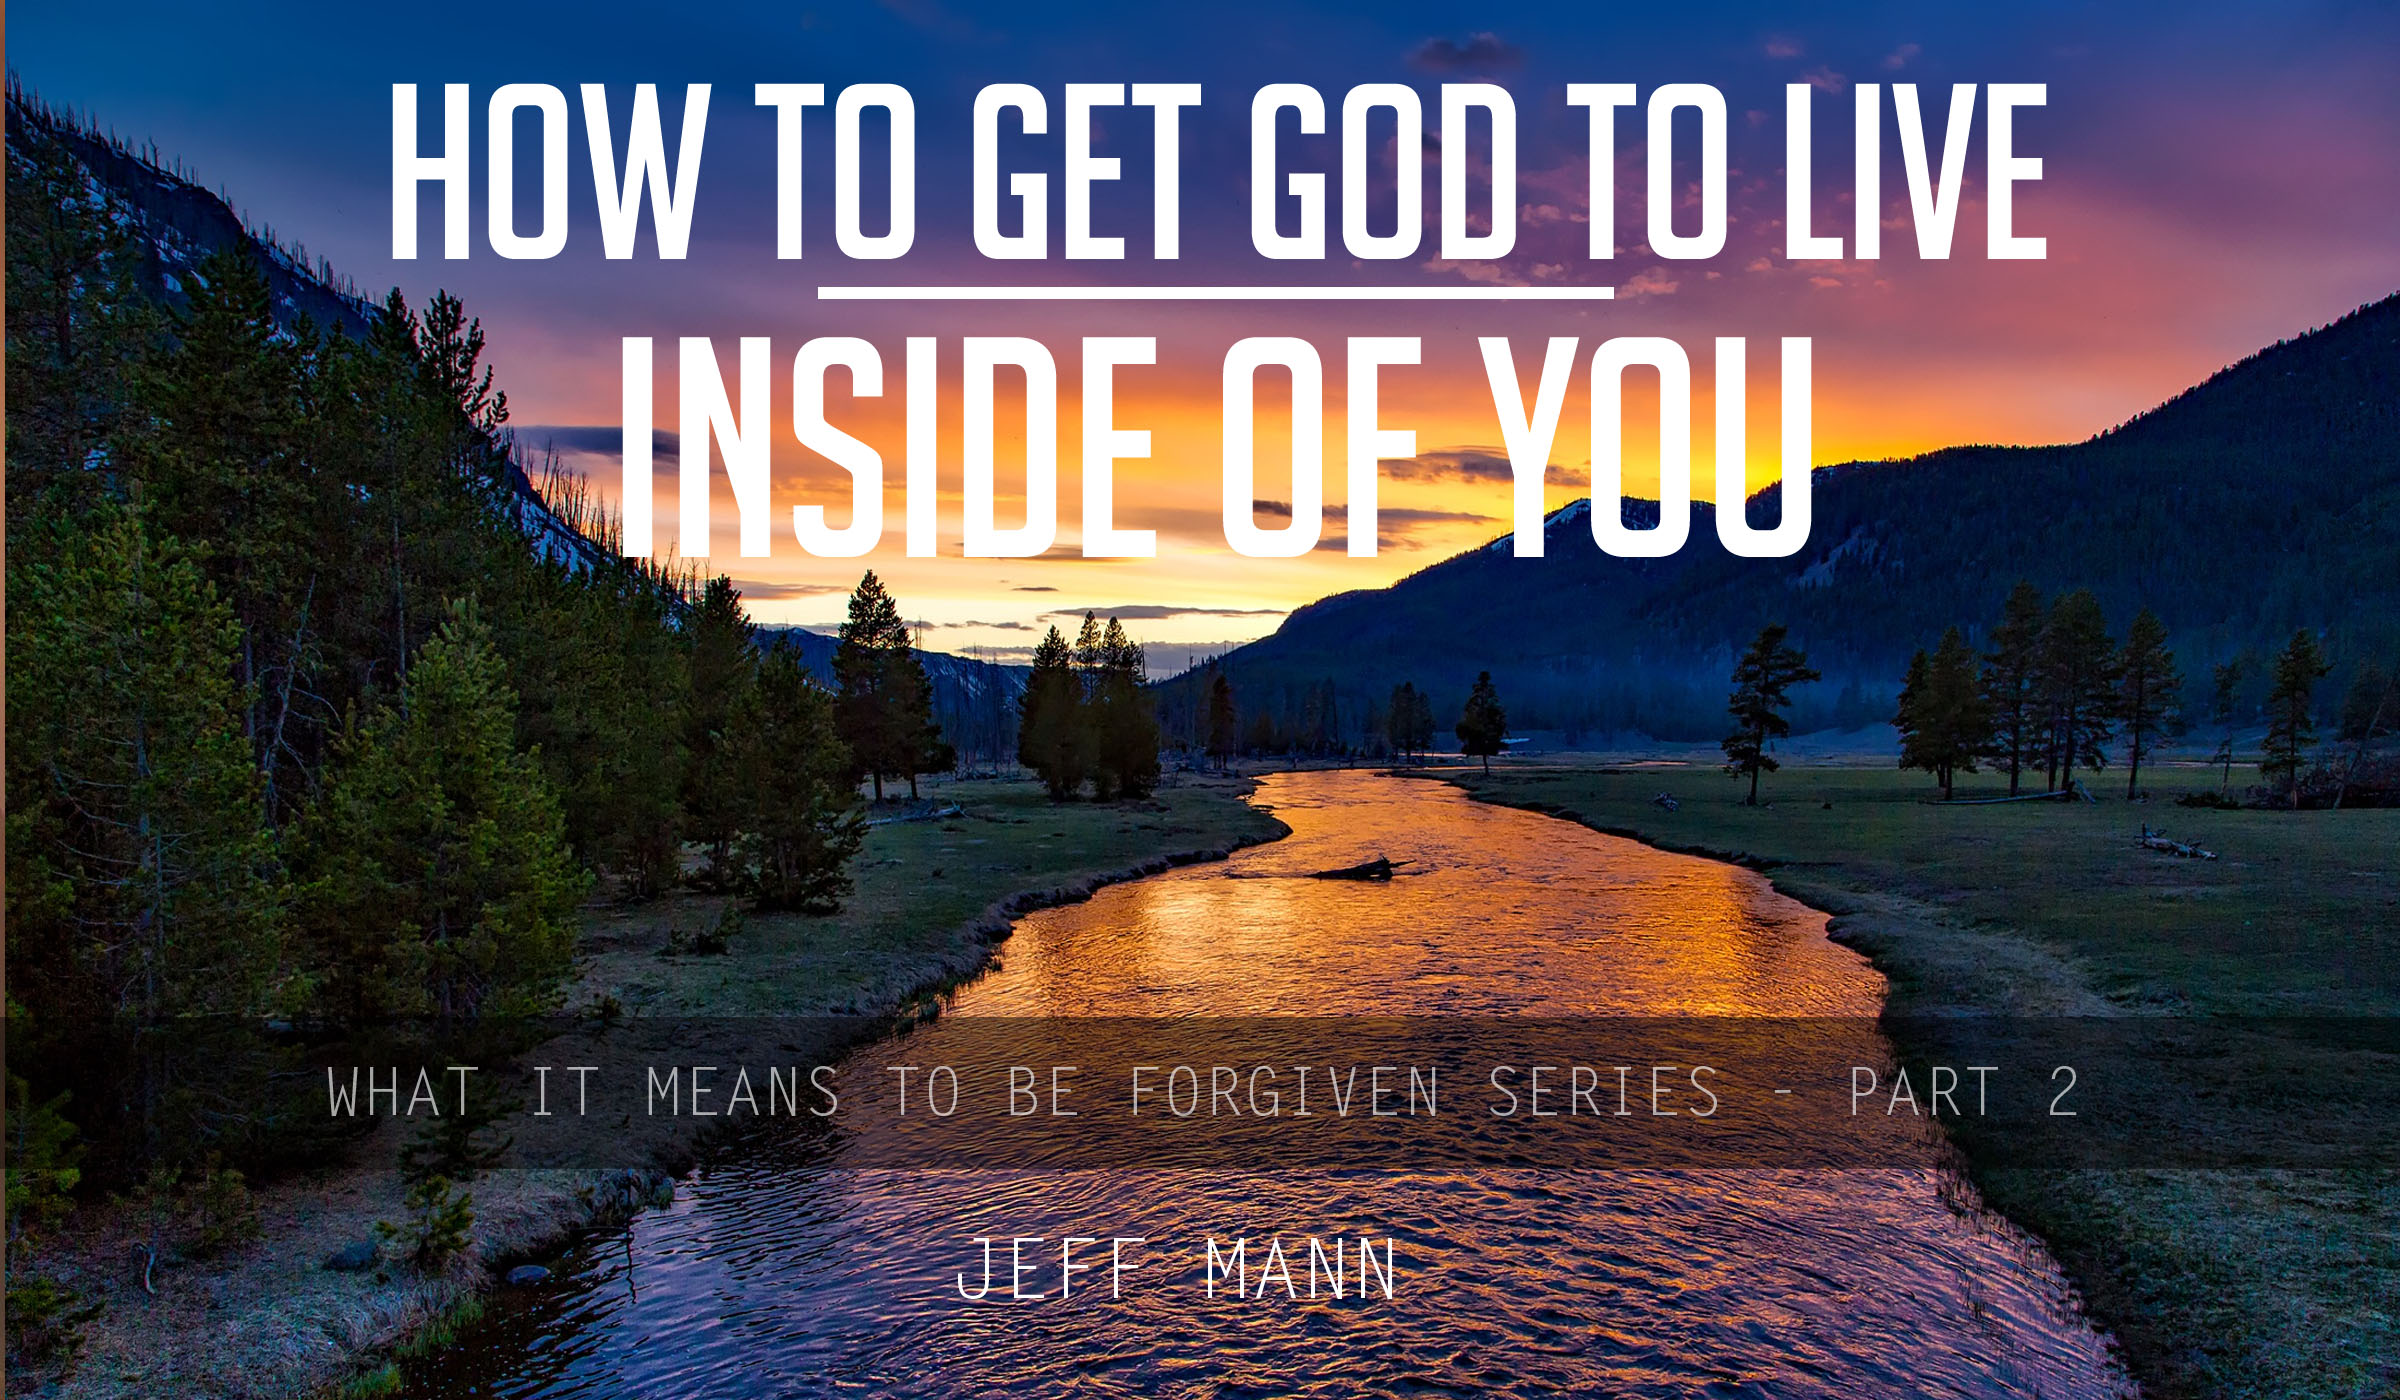 How to get God to live inside of you